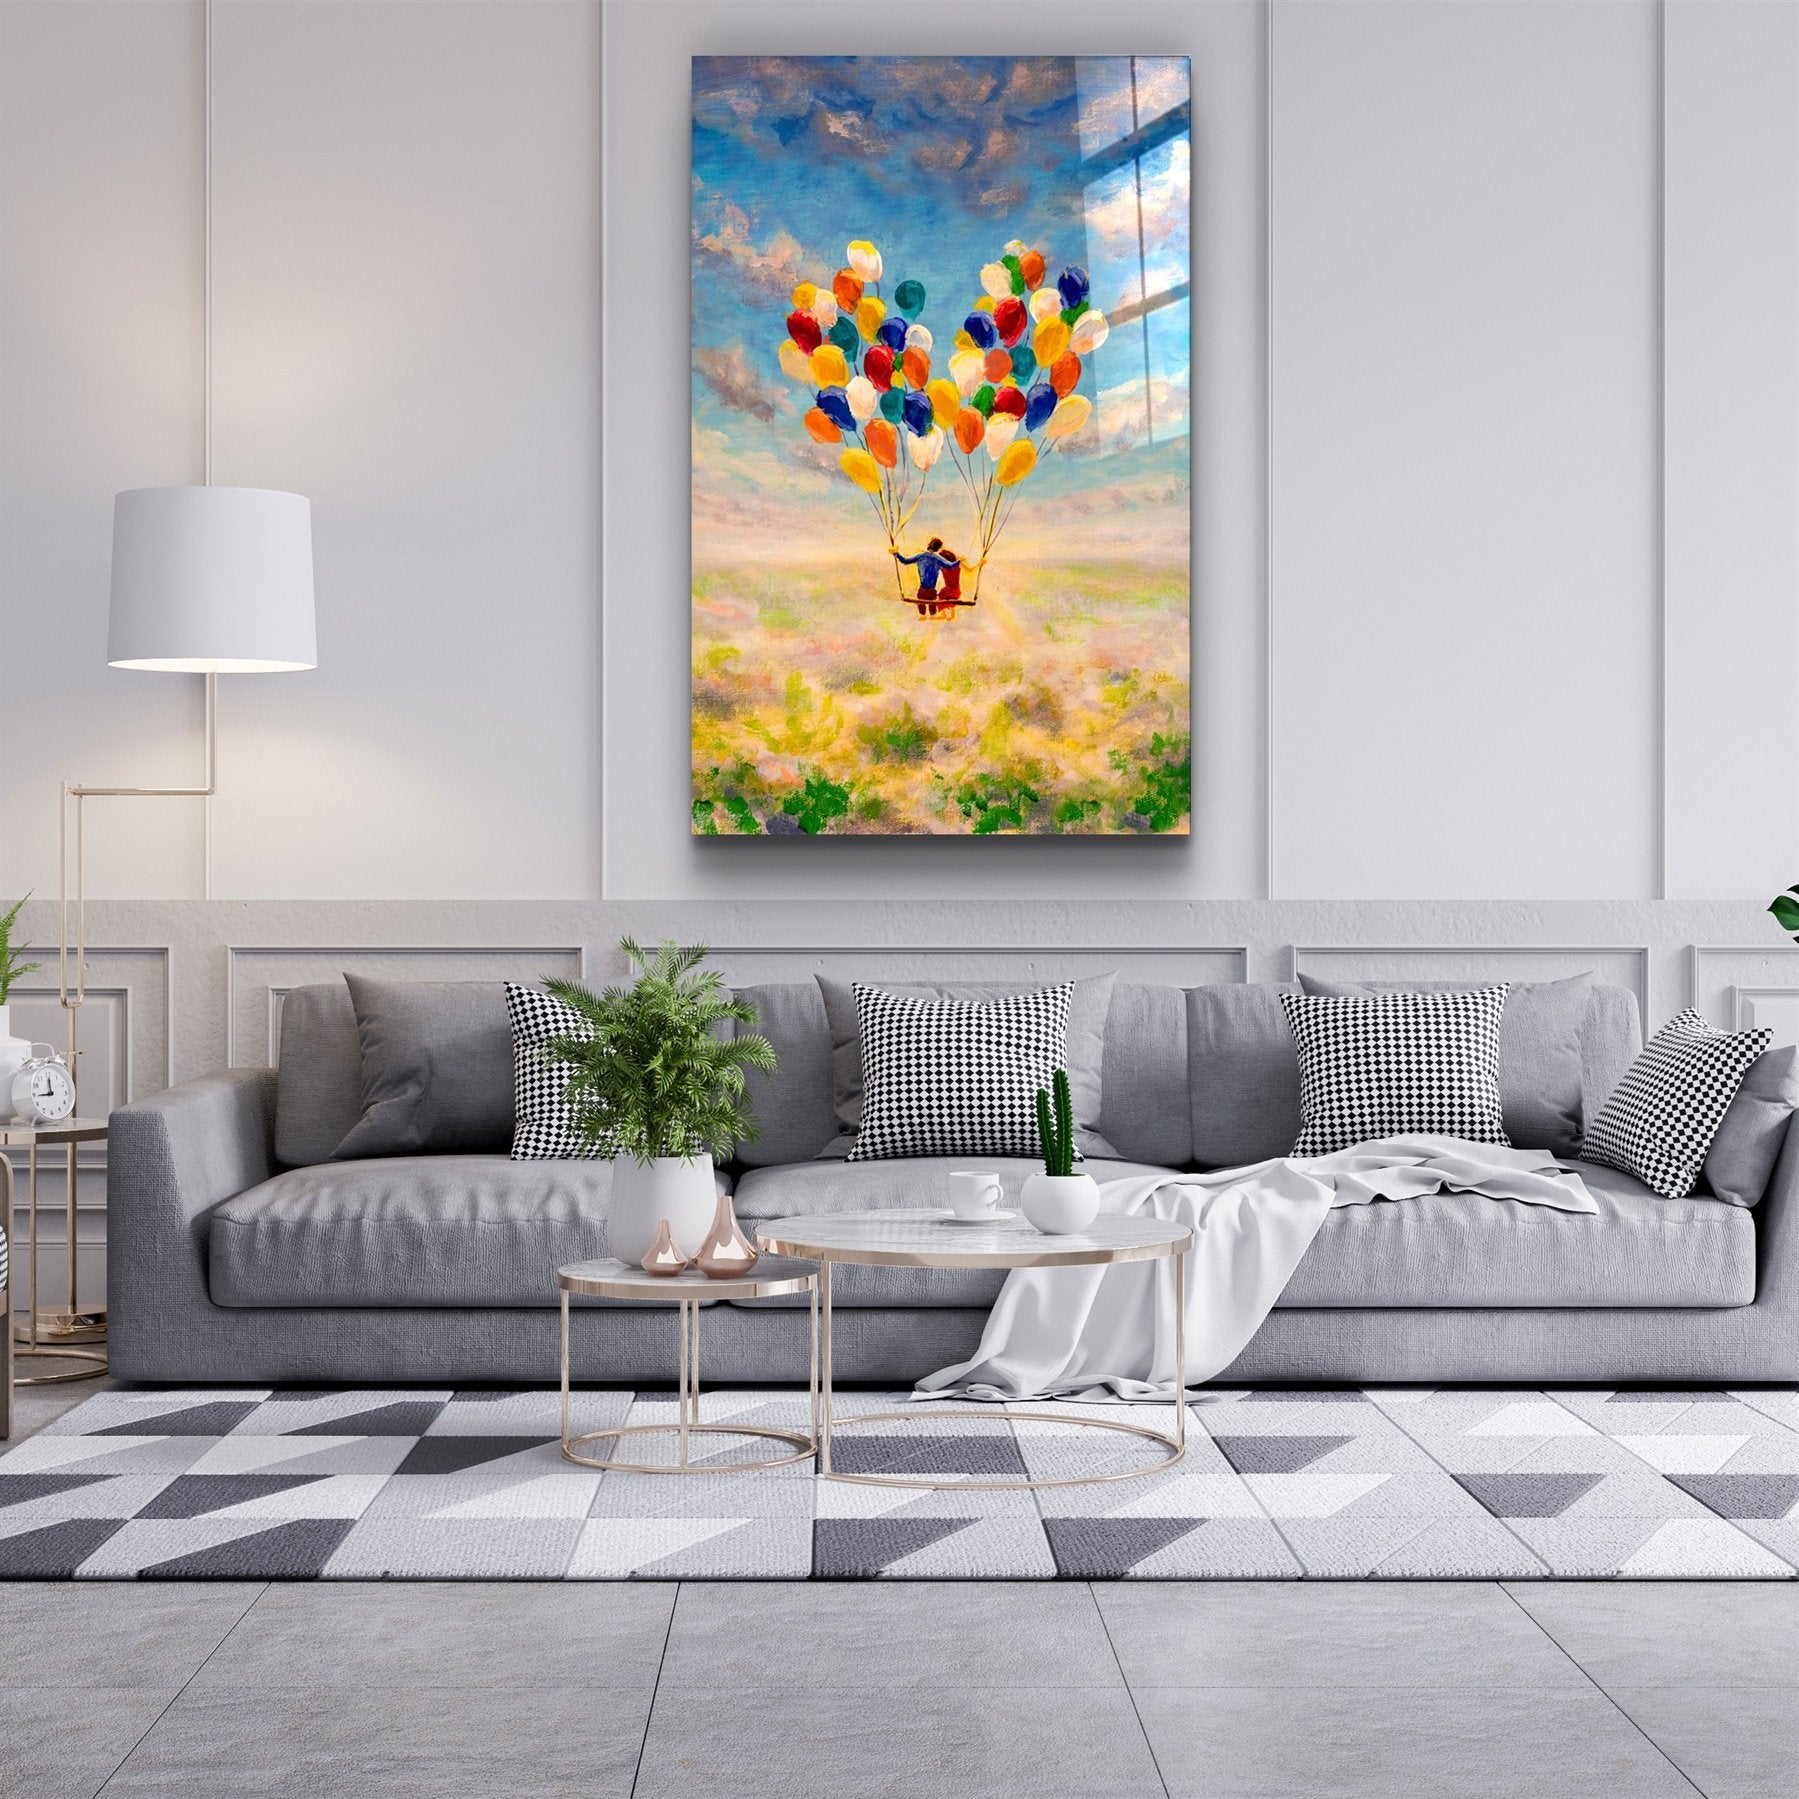 ・"Abstract Colorful Baloons"・Glass Wall Art